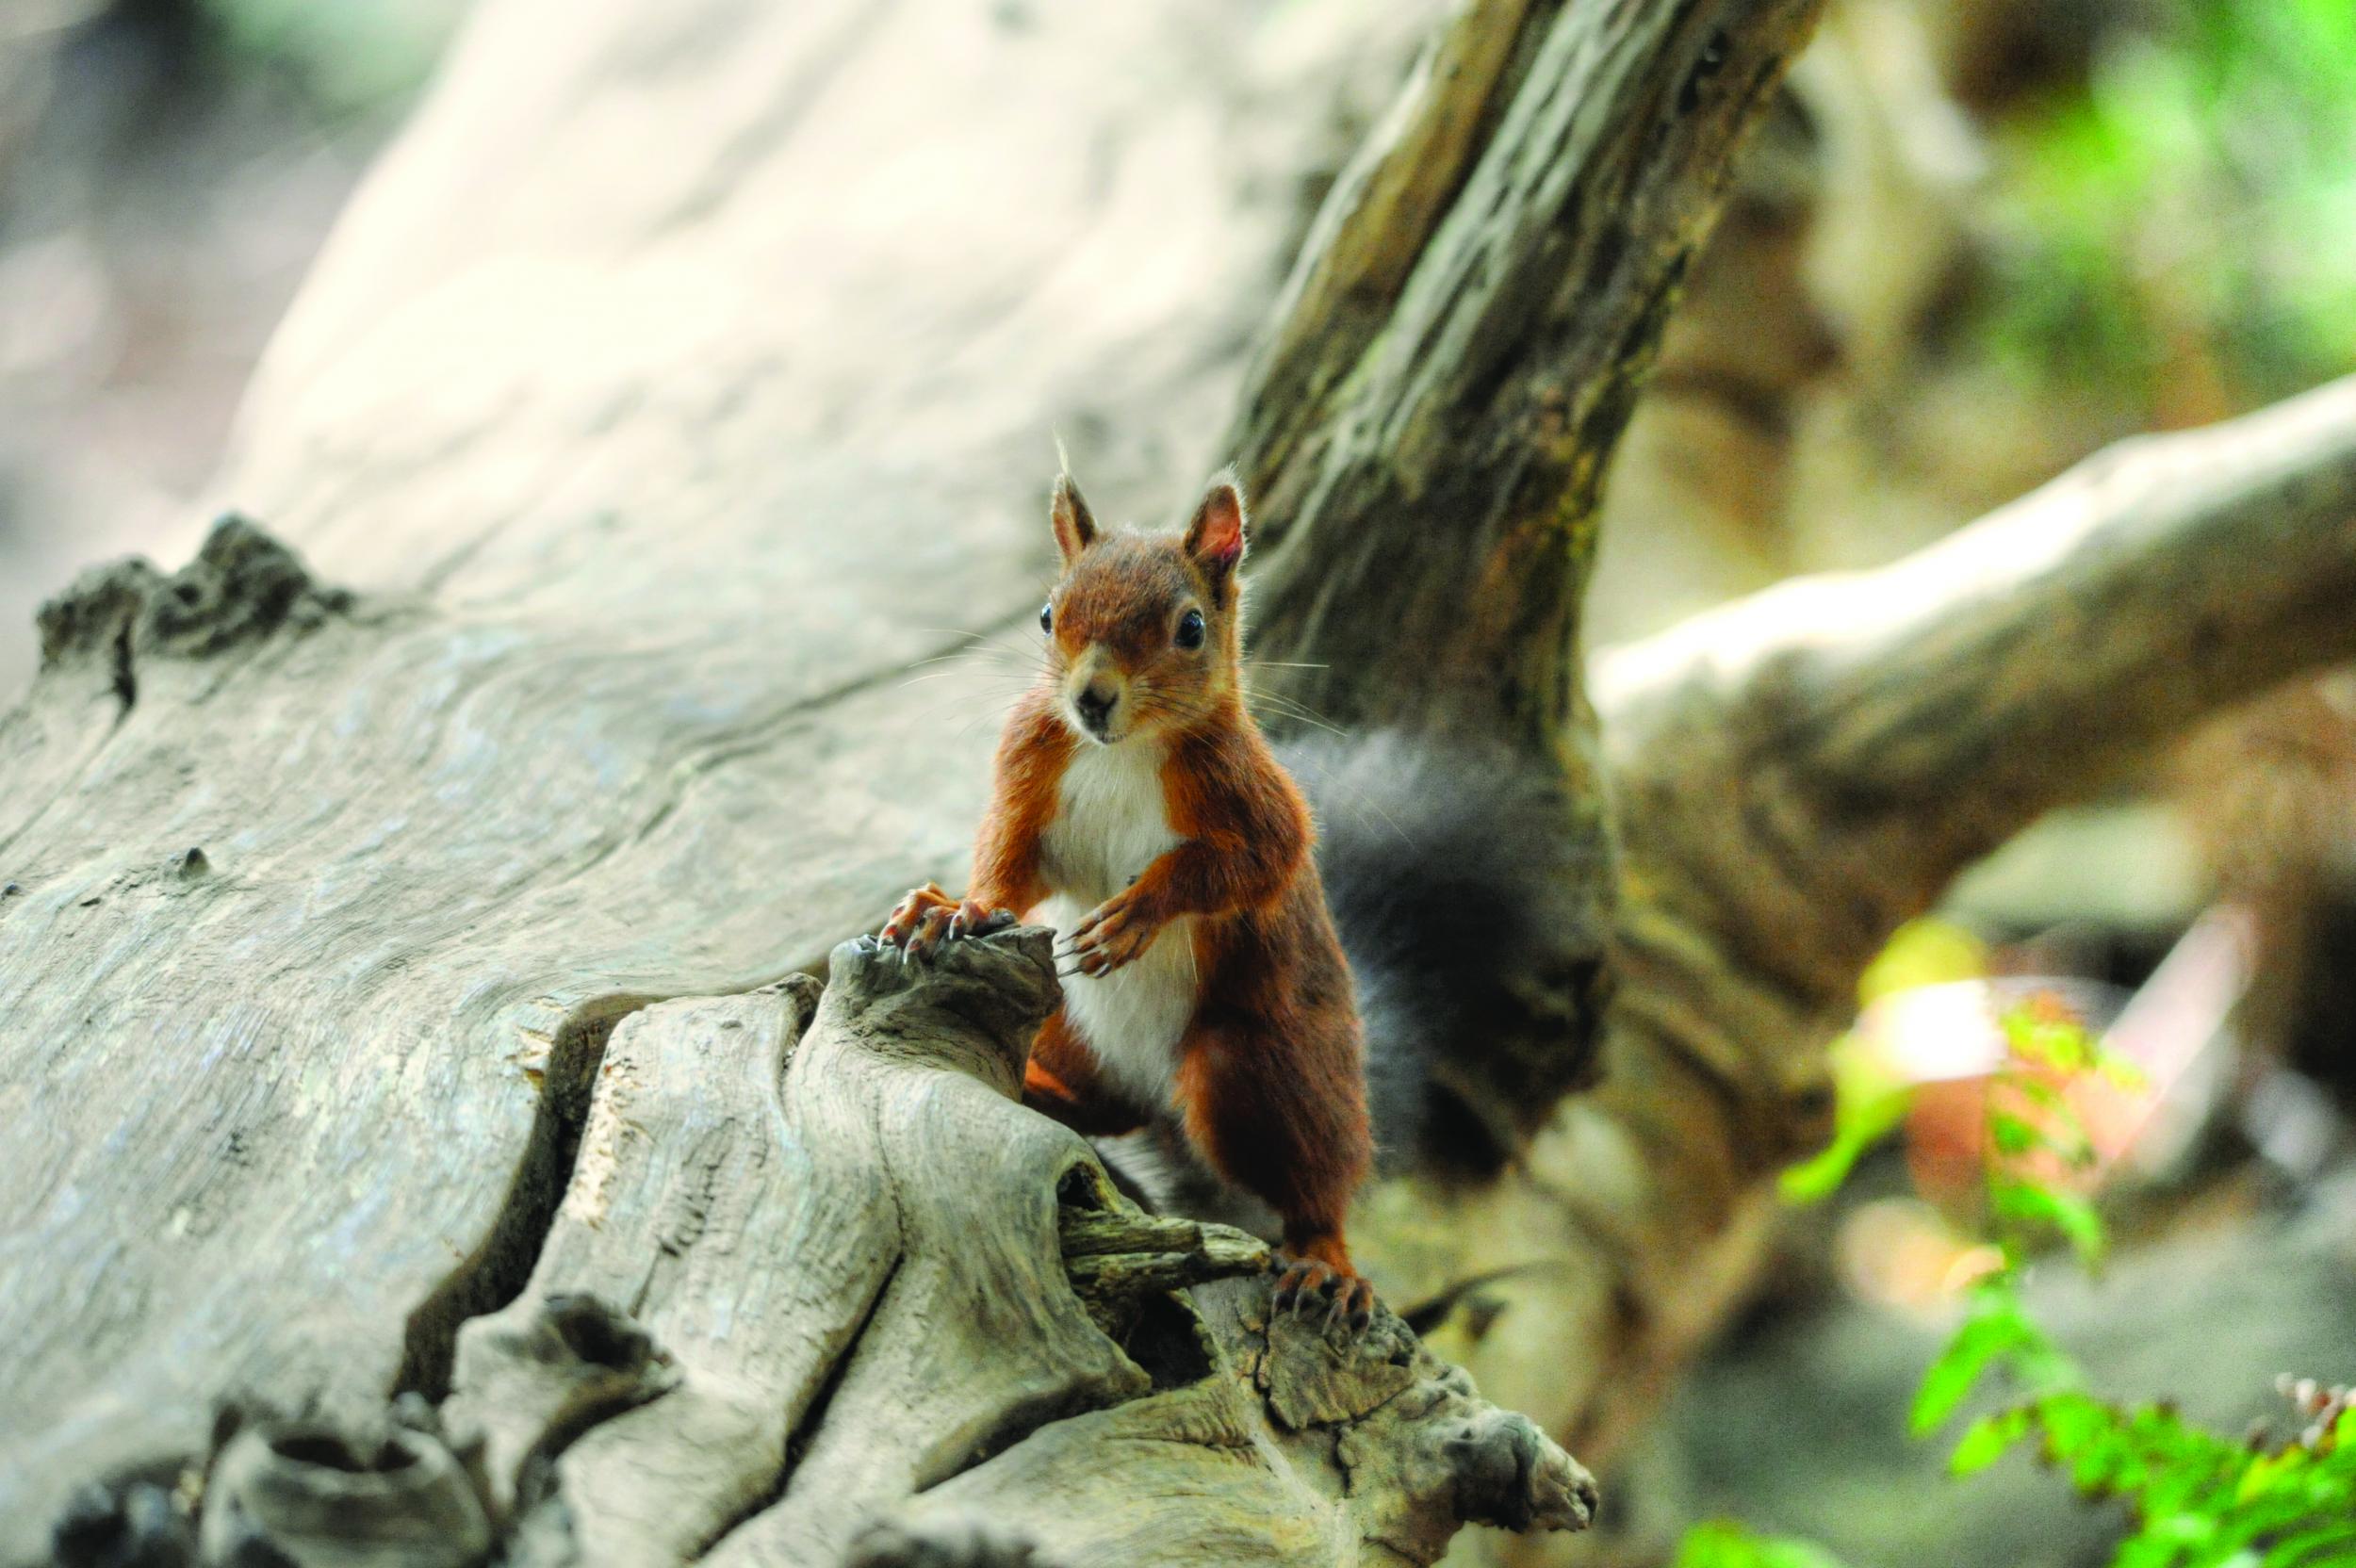 Native red squirrels can be found on Brownsea Island